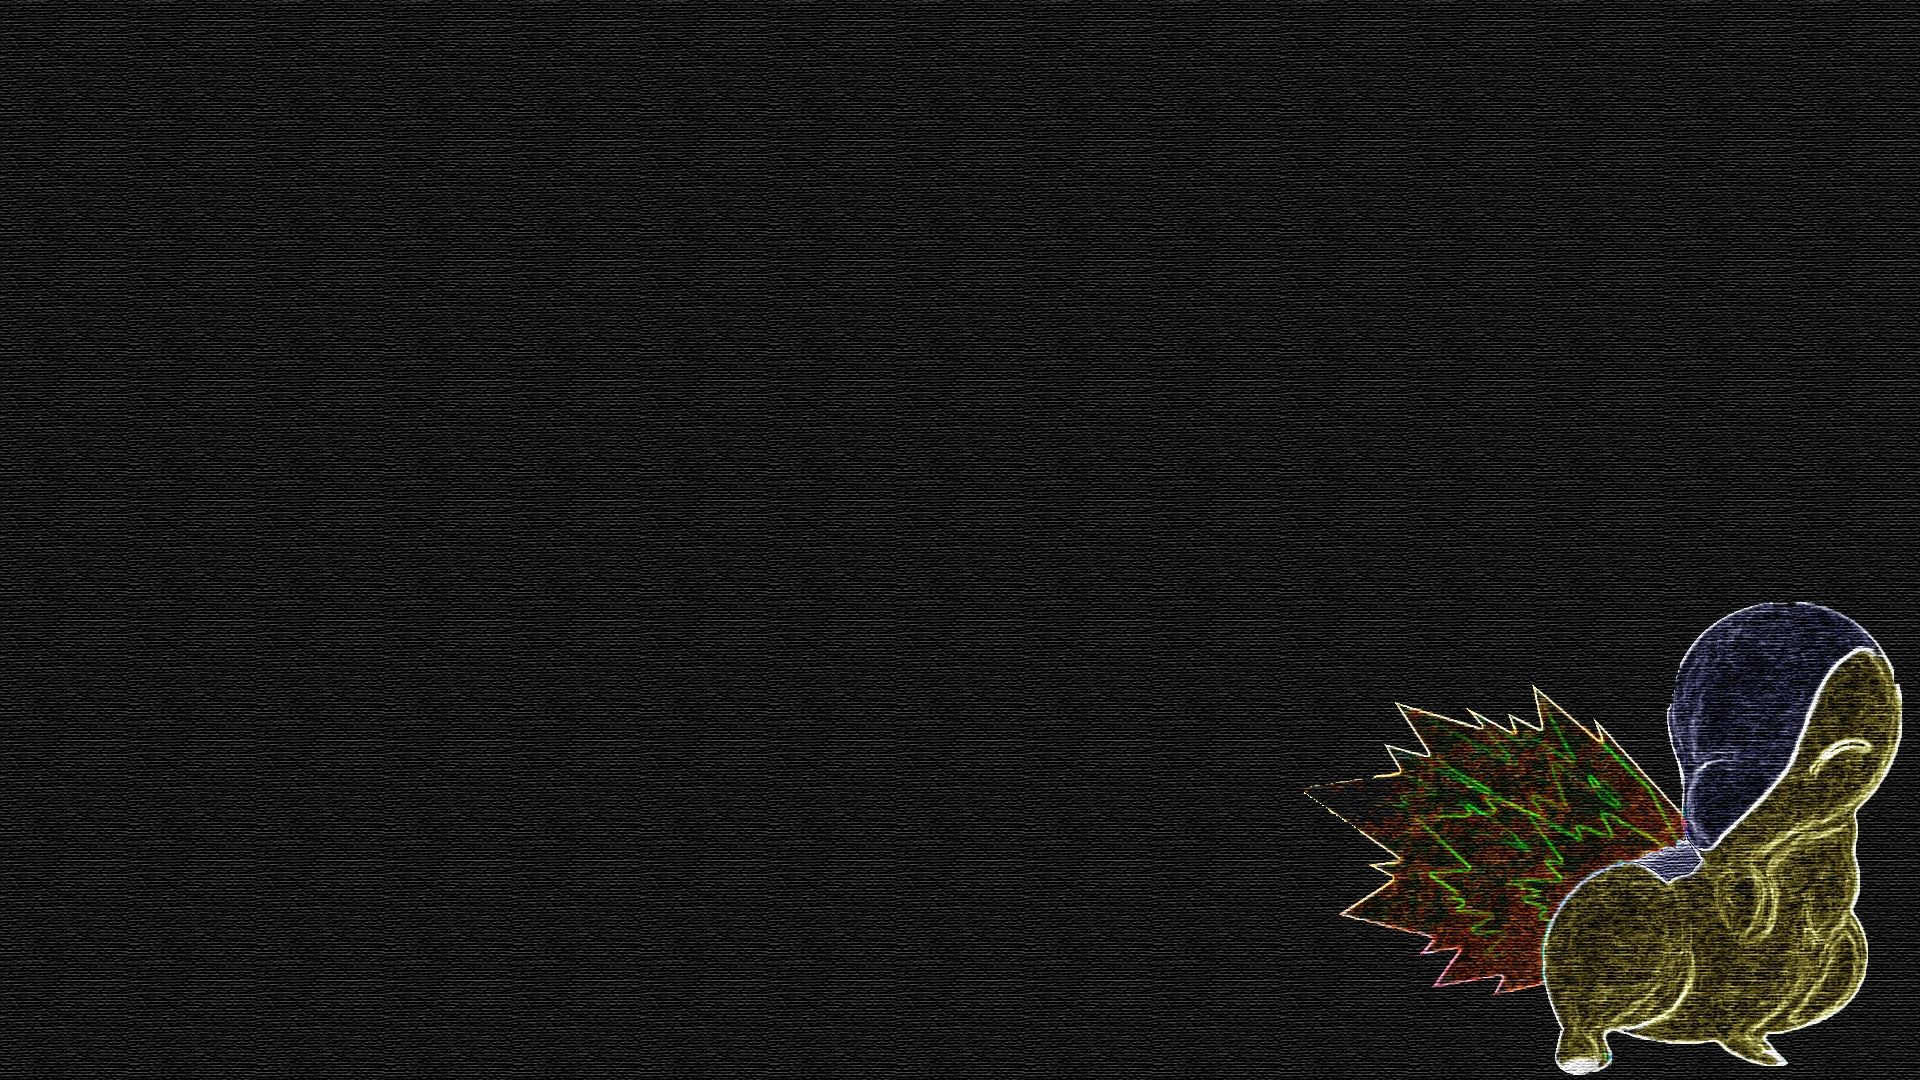 1920x1080 I am starting to use photoshop and made this cyndaquil wallpaper 